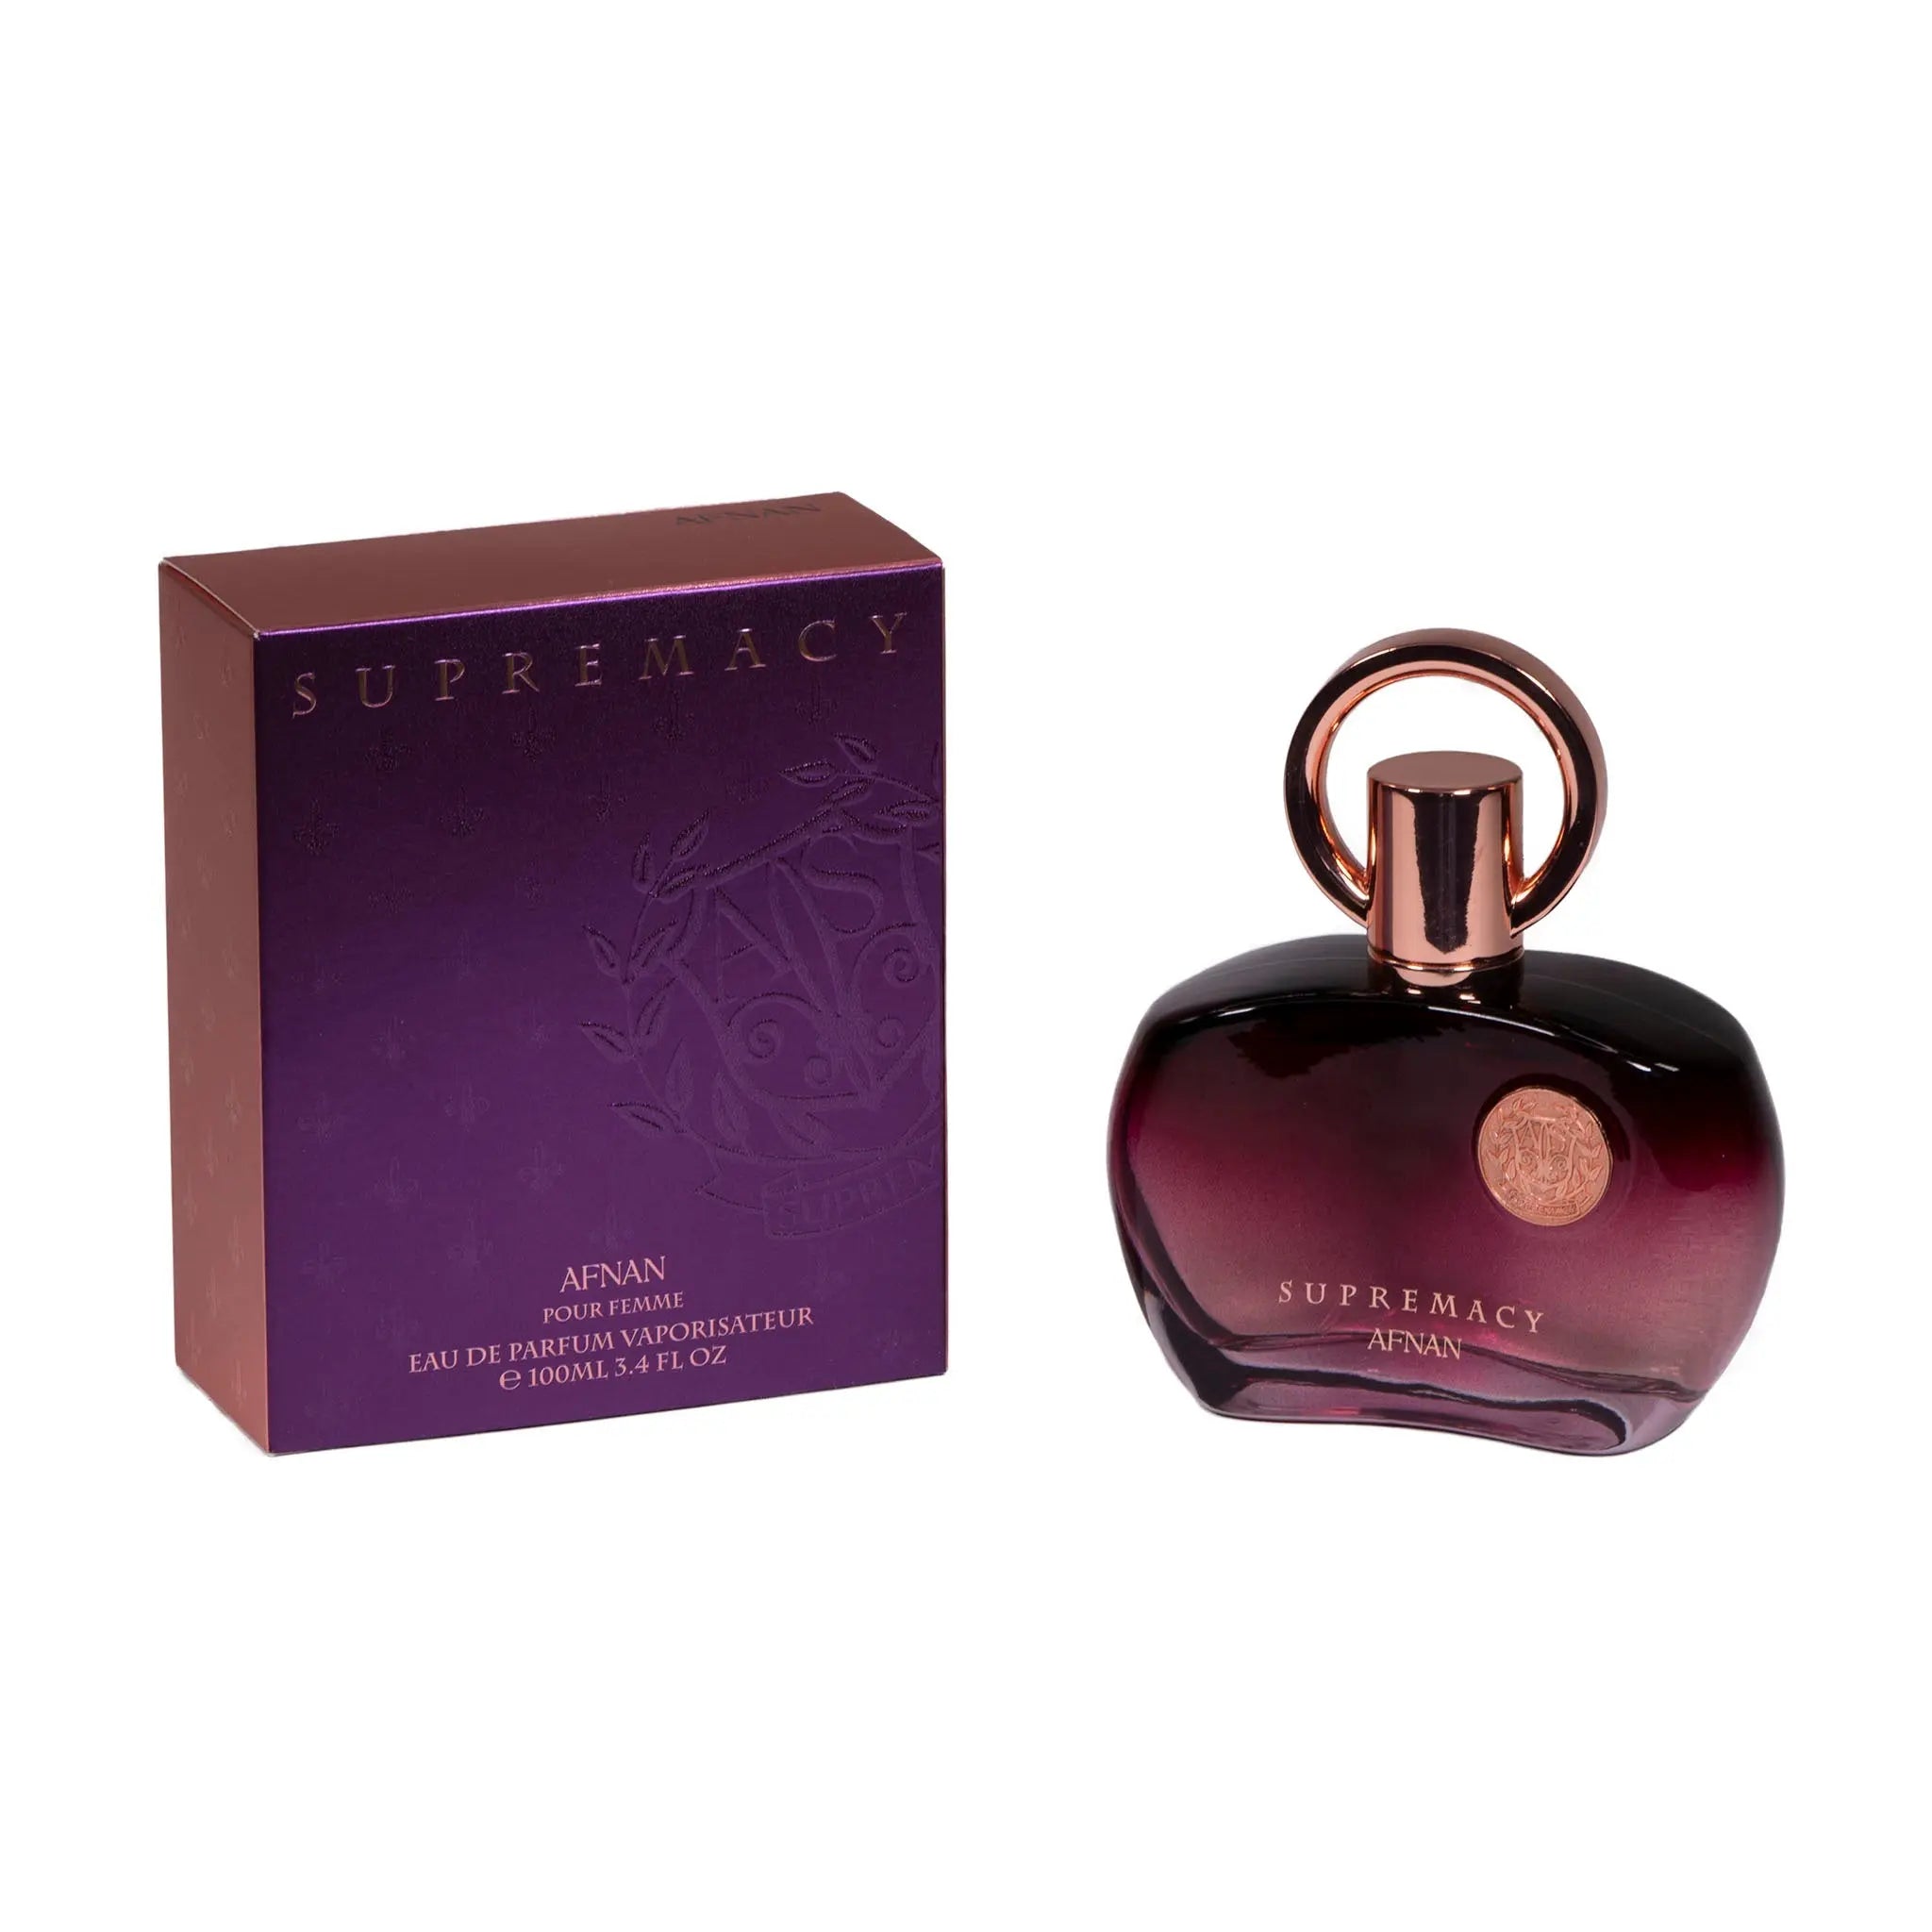 The image displays a perfume set which includes a bottle and its packaging box. The bottle has a dark purple gradient color with a glossy finish and a rose gold cap with a loop design on top.  Next to the bottle is its box, in a matching purple shade with metallic sheen, and the brand and perfume name embossed on it. The box specifies that it is for women and contains "Eau de Parfum Vaporisateur" of 100ml or 3.4 fl oz. The overall presentation is elegant and suggests a luxurious fragrance product.